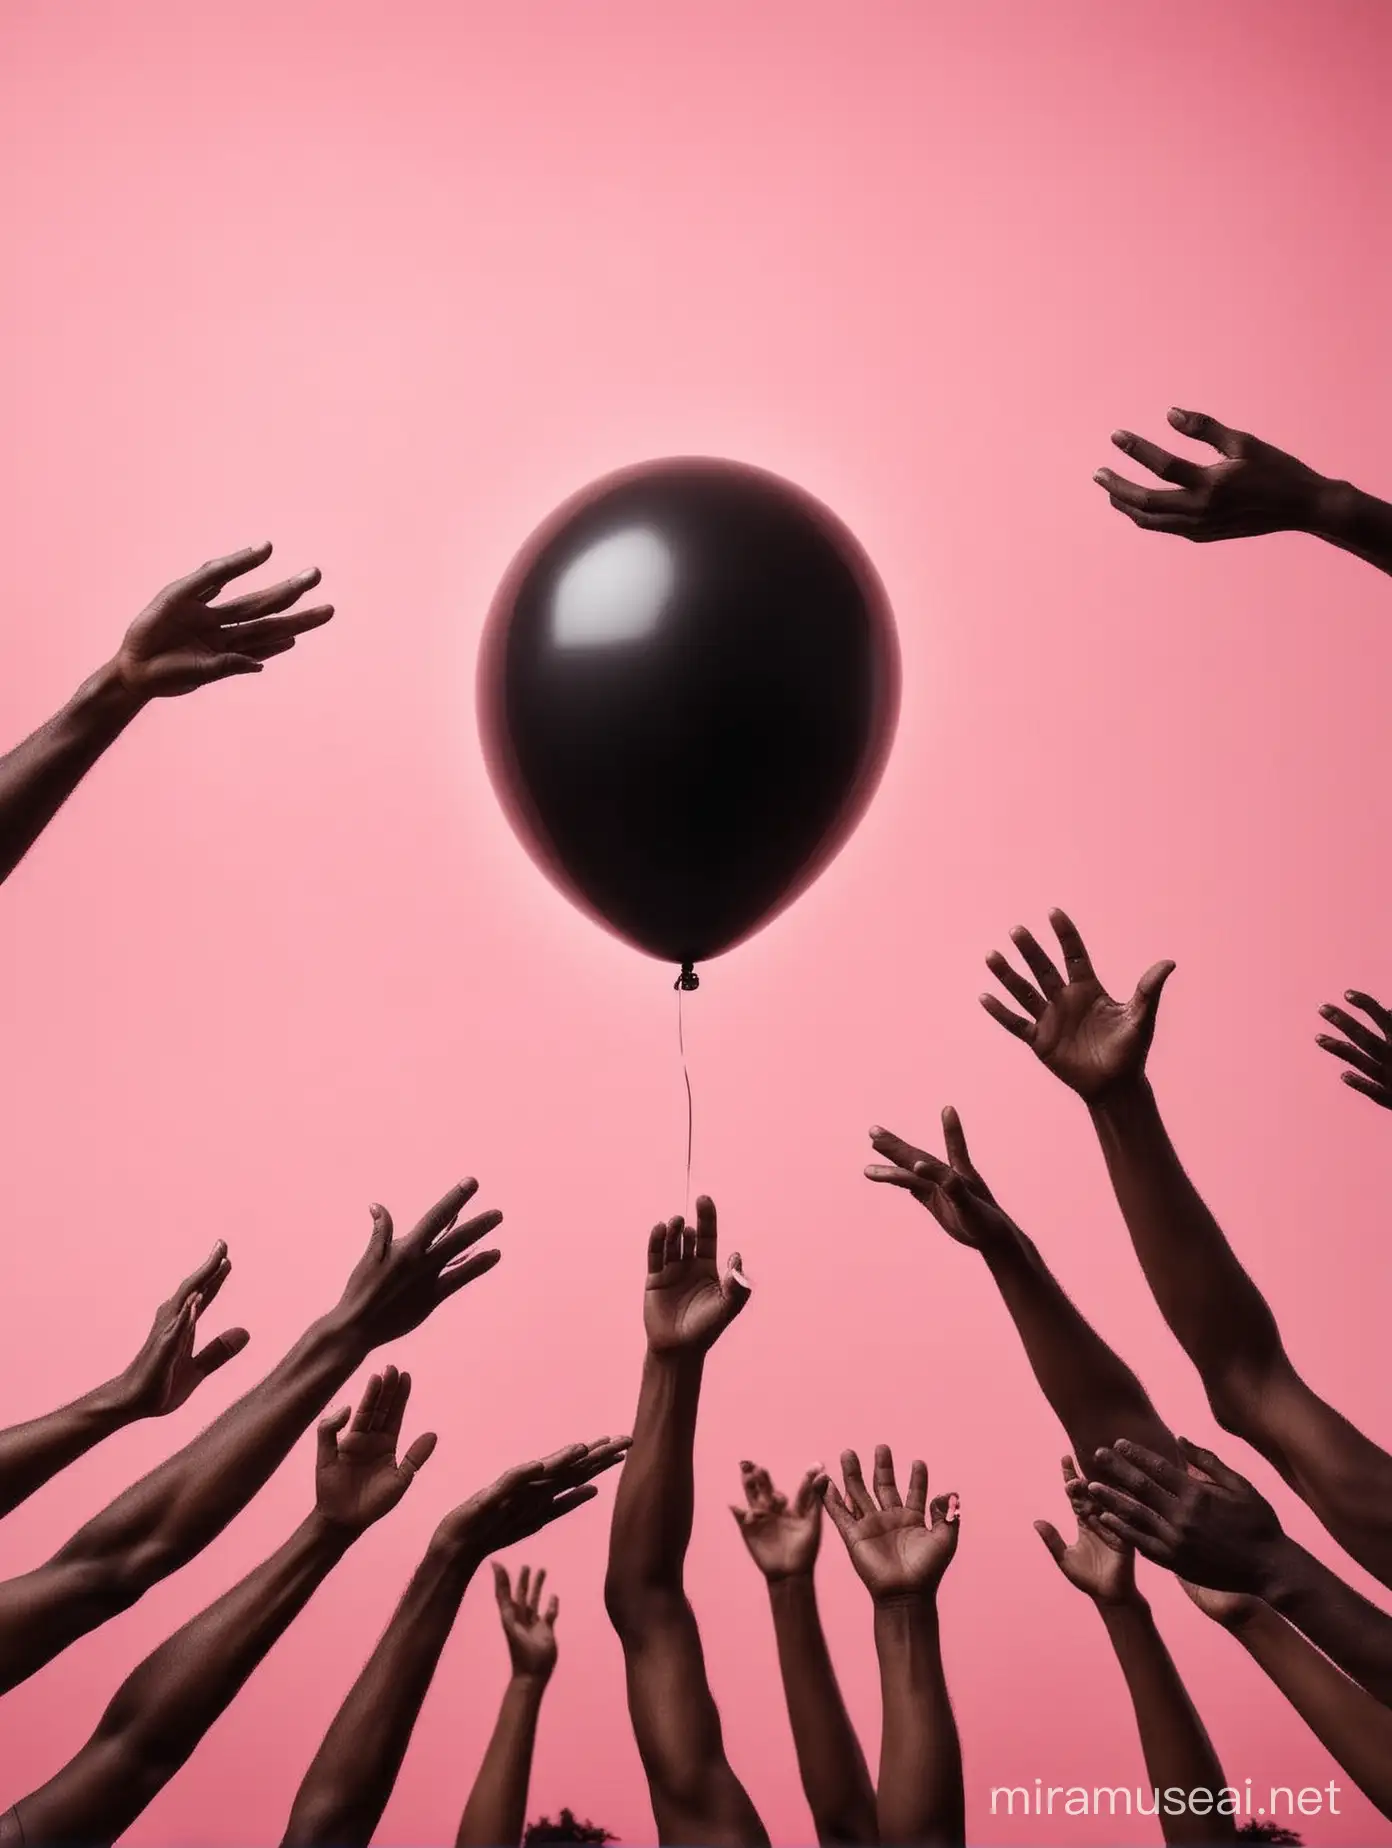 Mens Hands Reaching for Burning Black Balloon on Glossy Pink Background